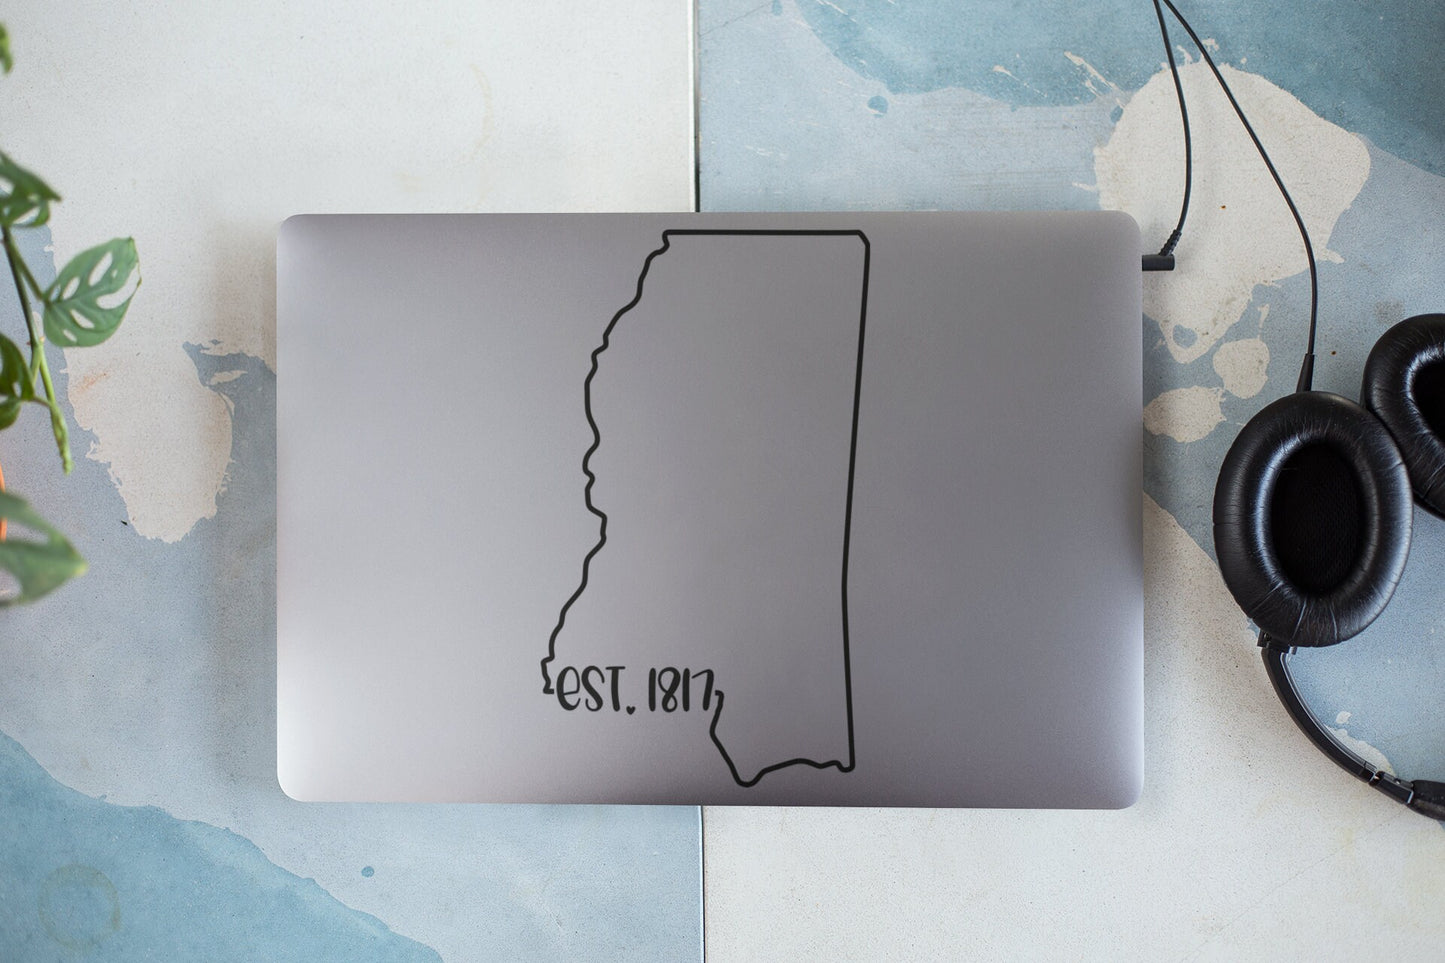 Mississippi EST. 1817 Decal - Many Colors & Sizes